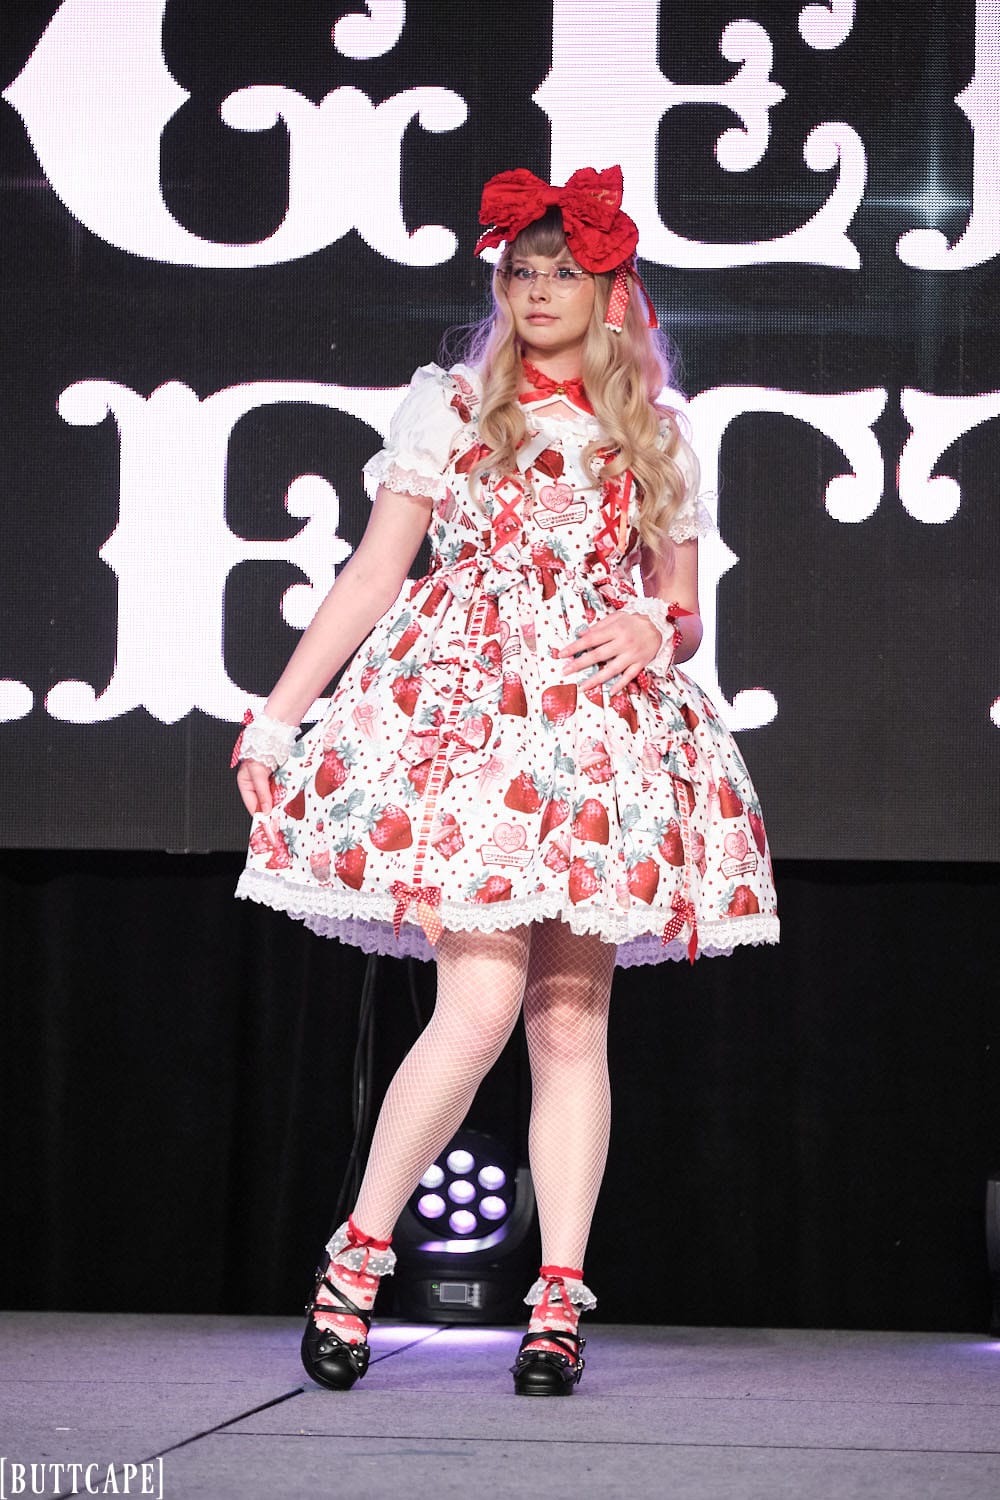 Model 2 wearing white an red strawberry sweet lolita dress, fishnet tights and black shoes - full body 1.